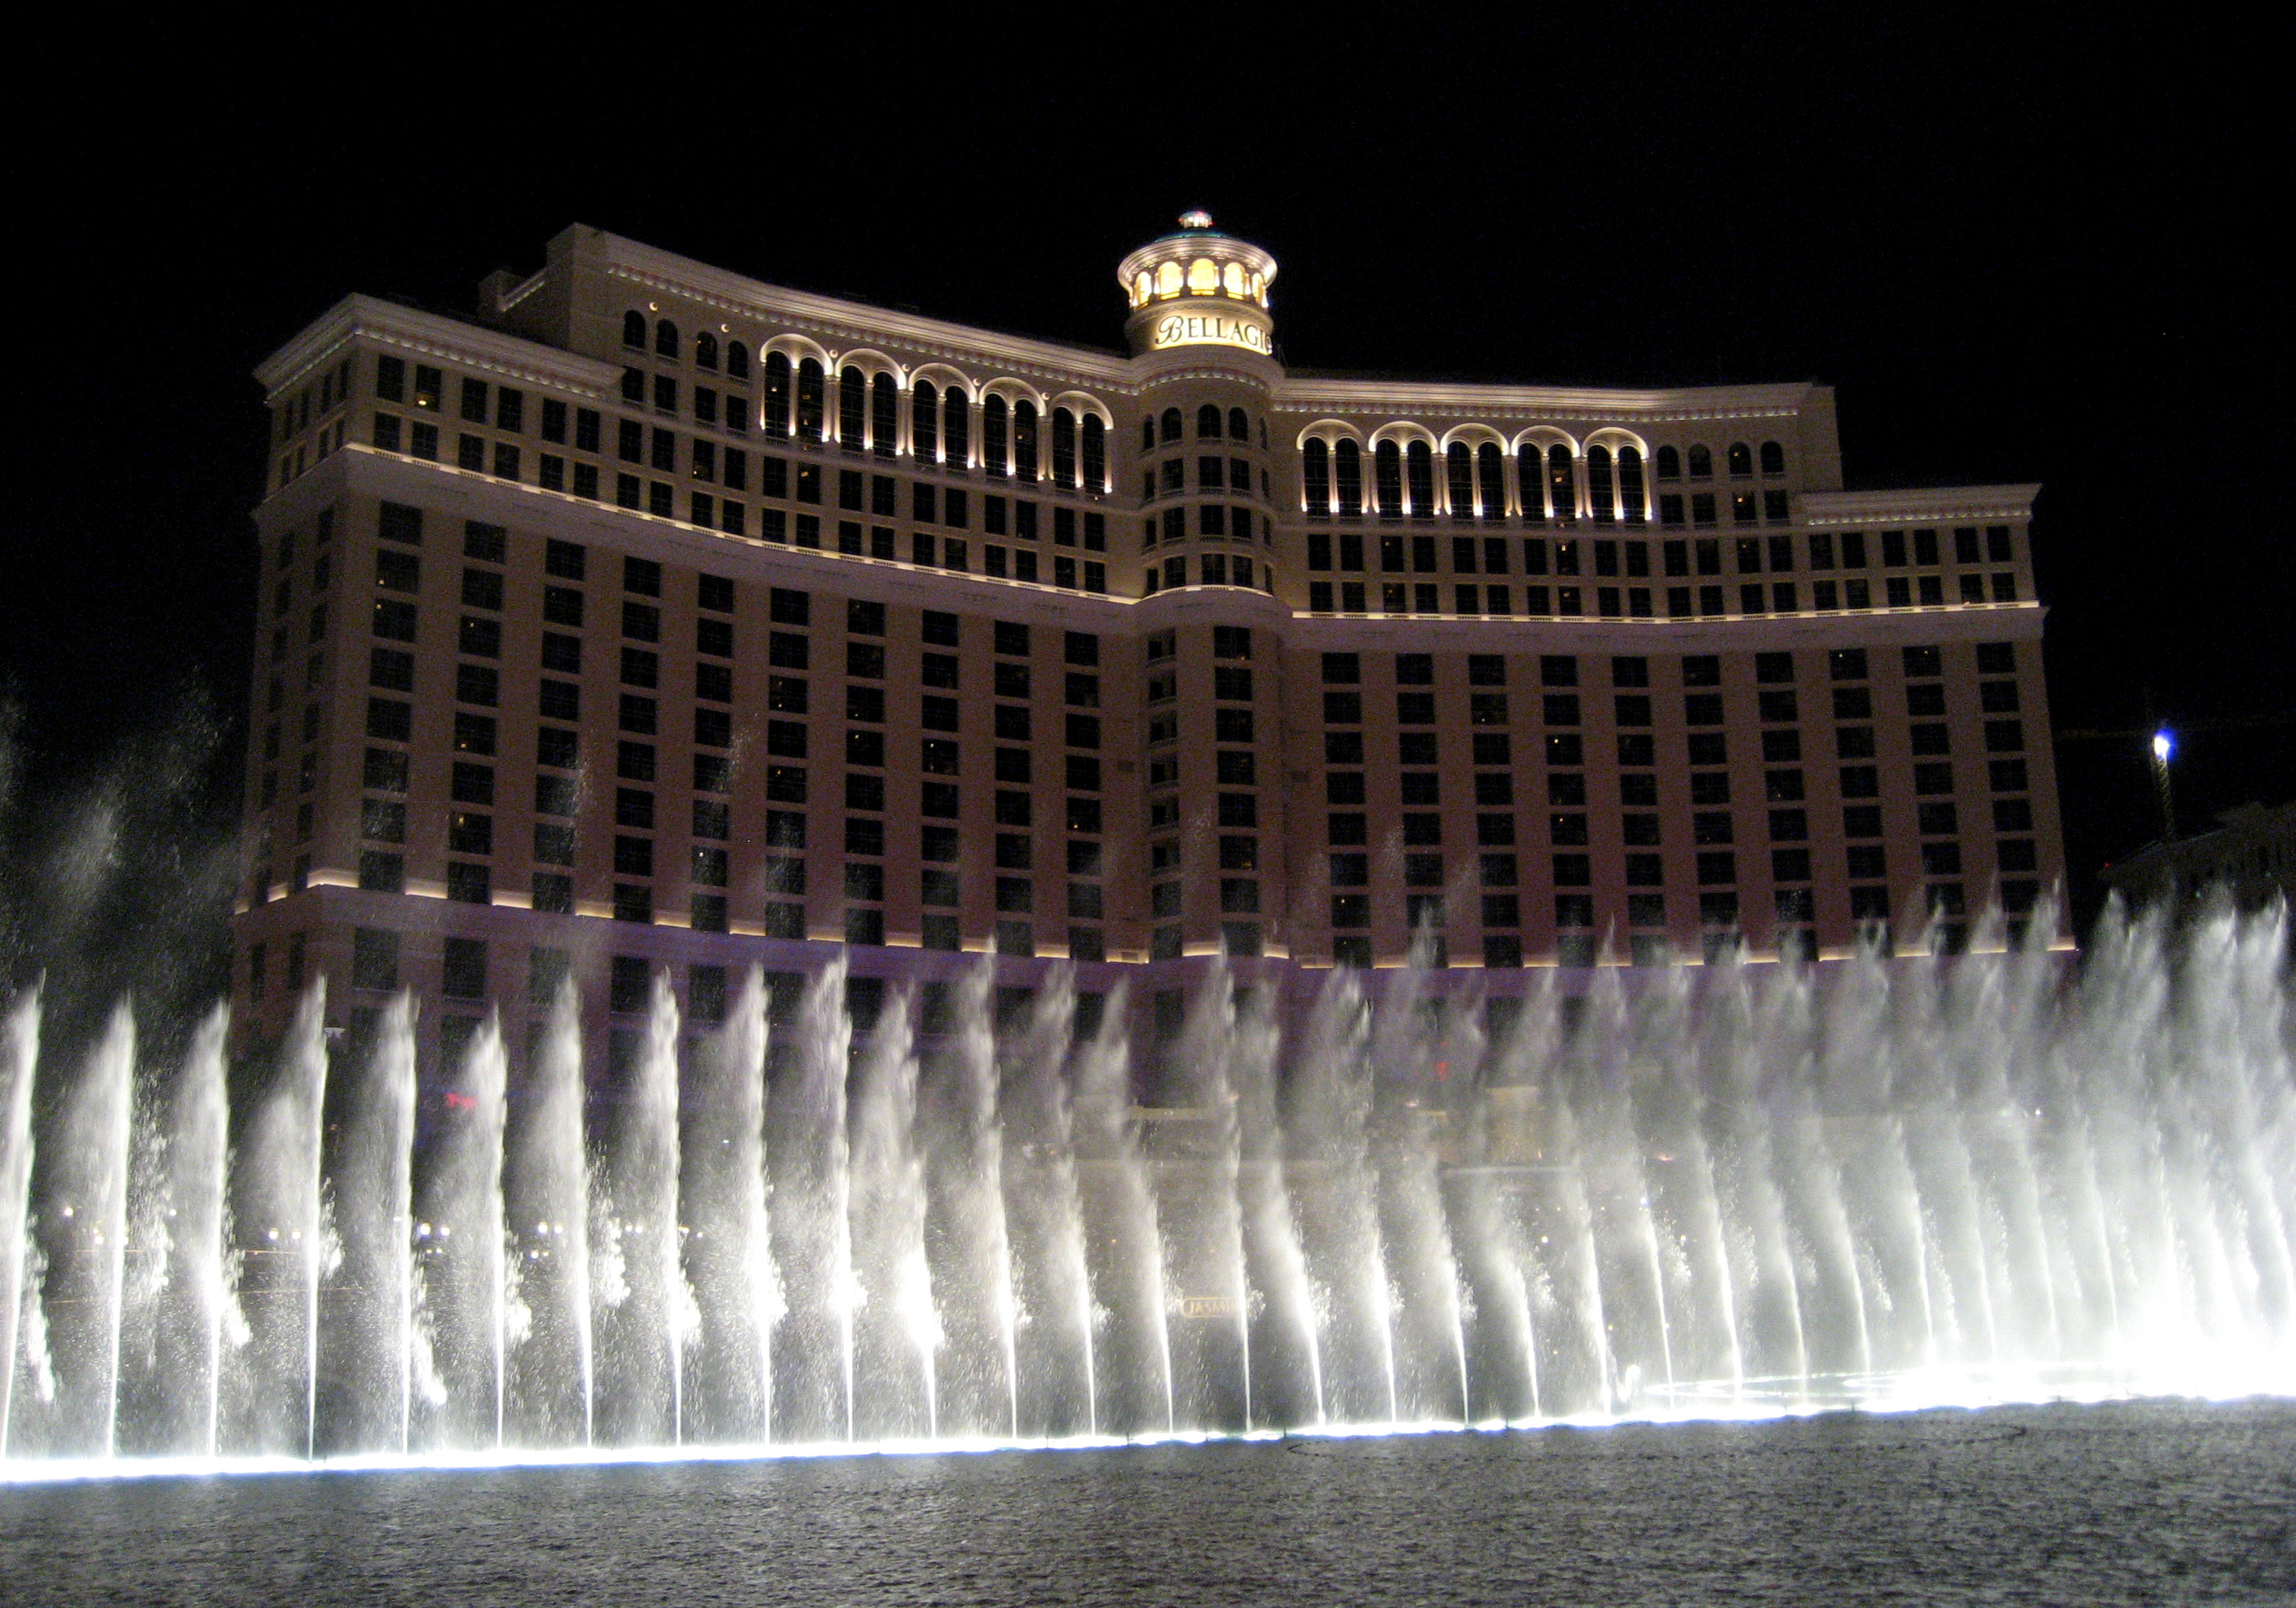 A general view of the Bellagio Hotel in Las Vegas